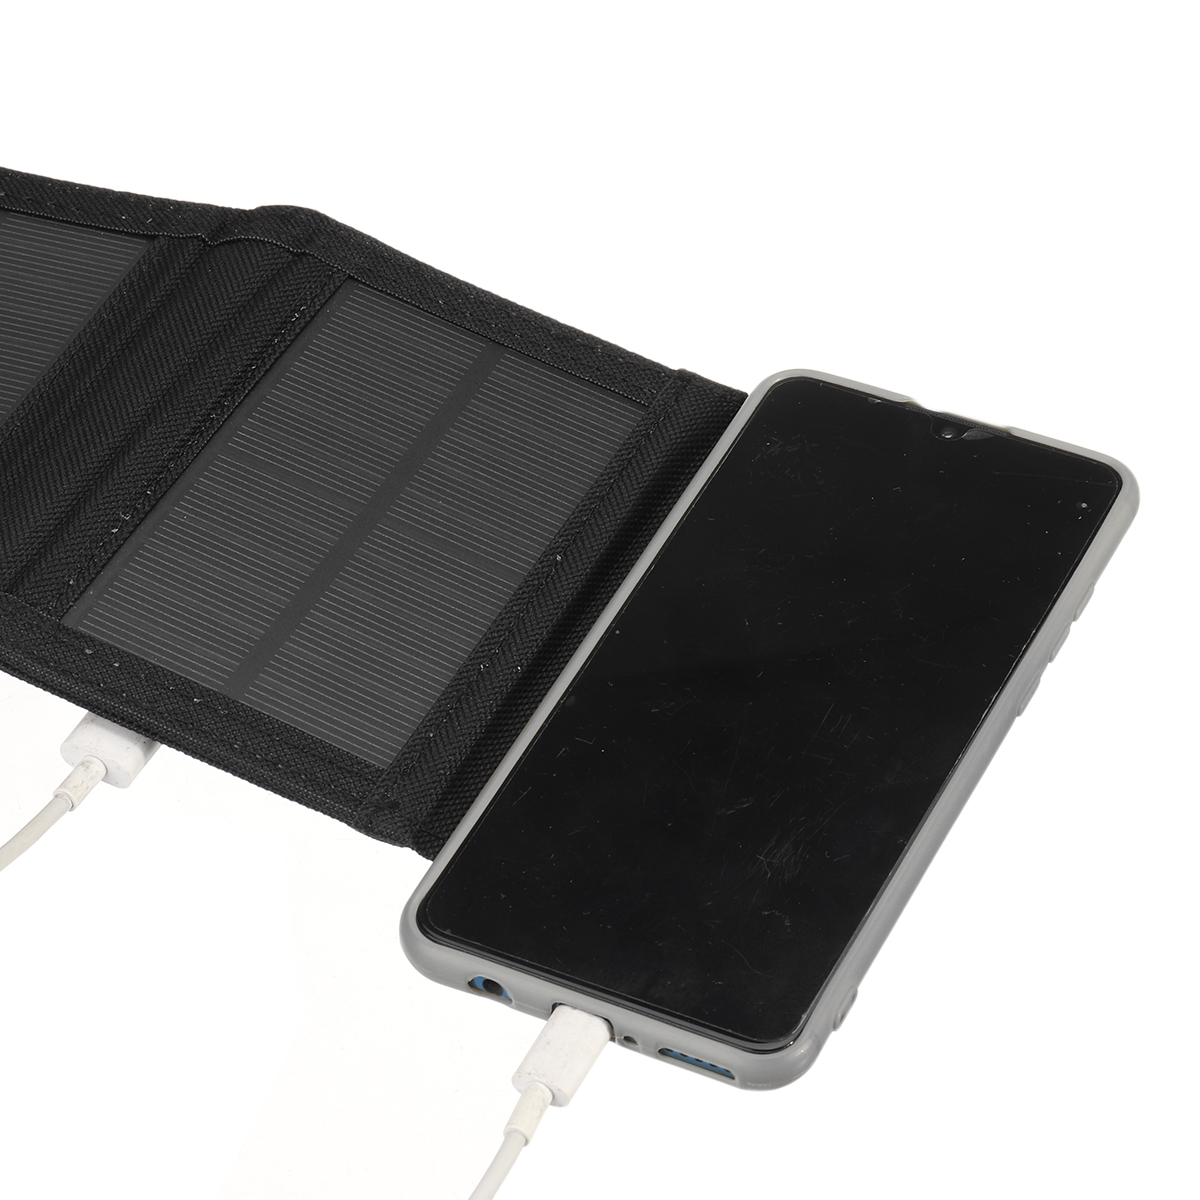 80W-5V-USB-Monocrystalline-Solar-Panel-Folding-Power-Bank-Outdoor-Camping-Hiking-Phone-Charger-1873791-4